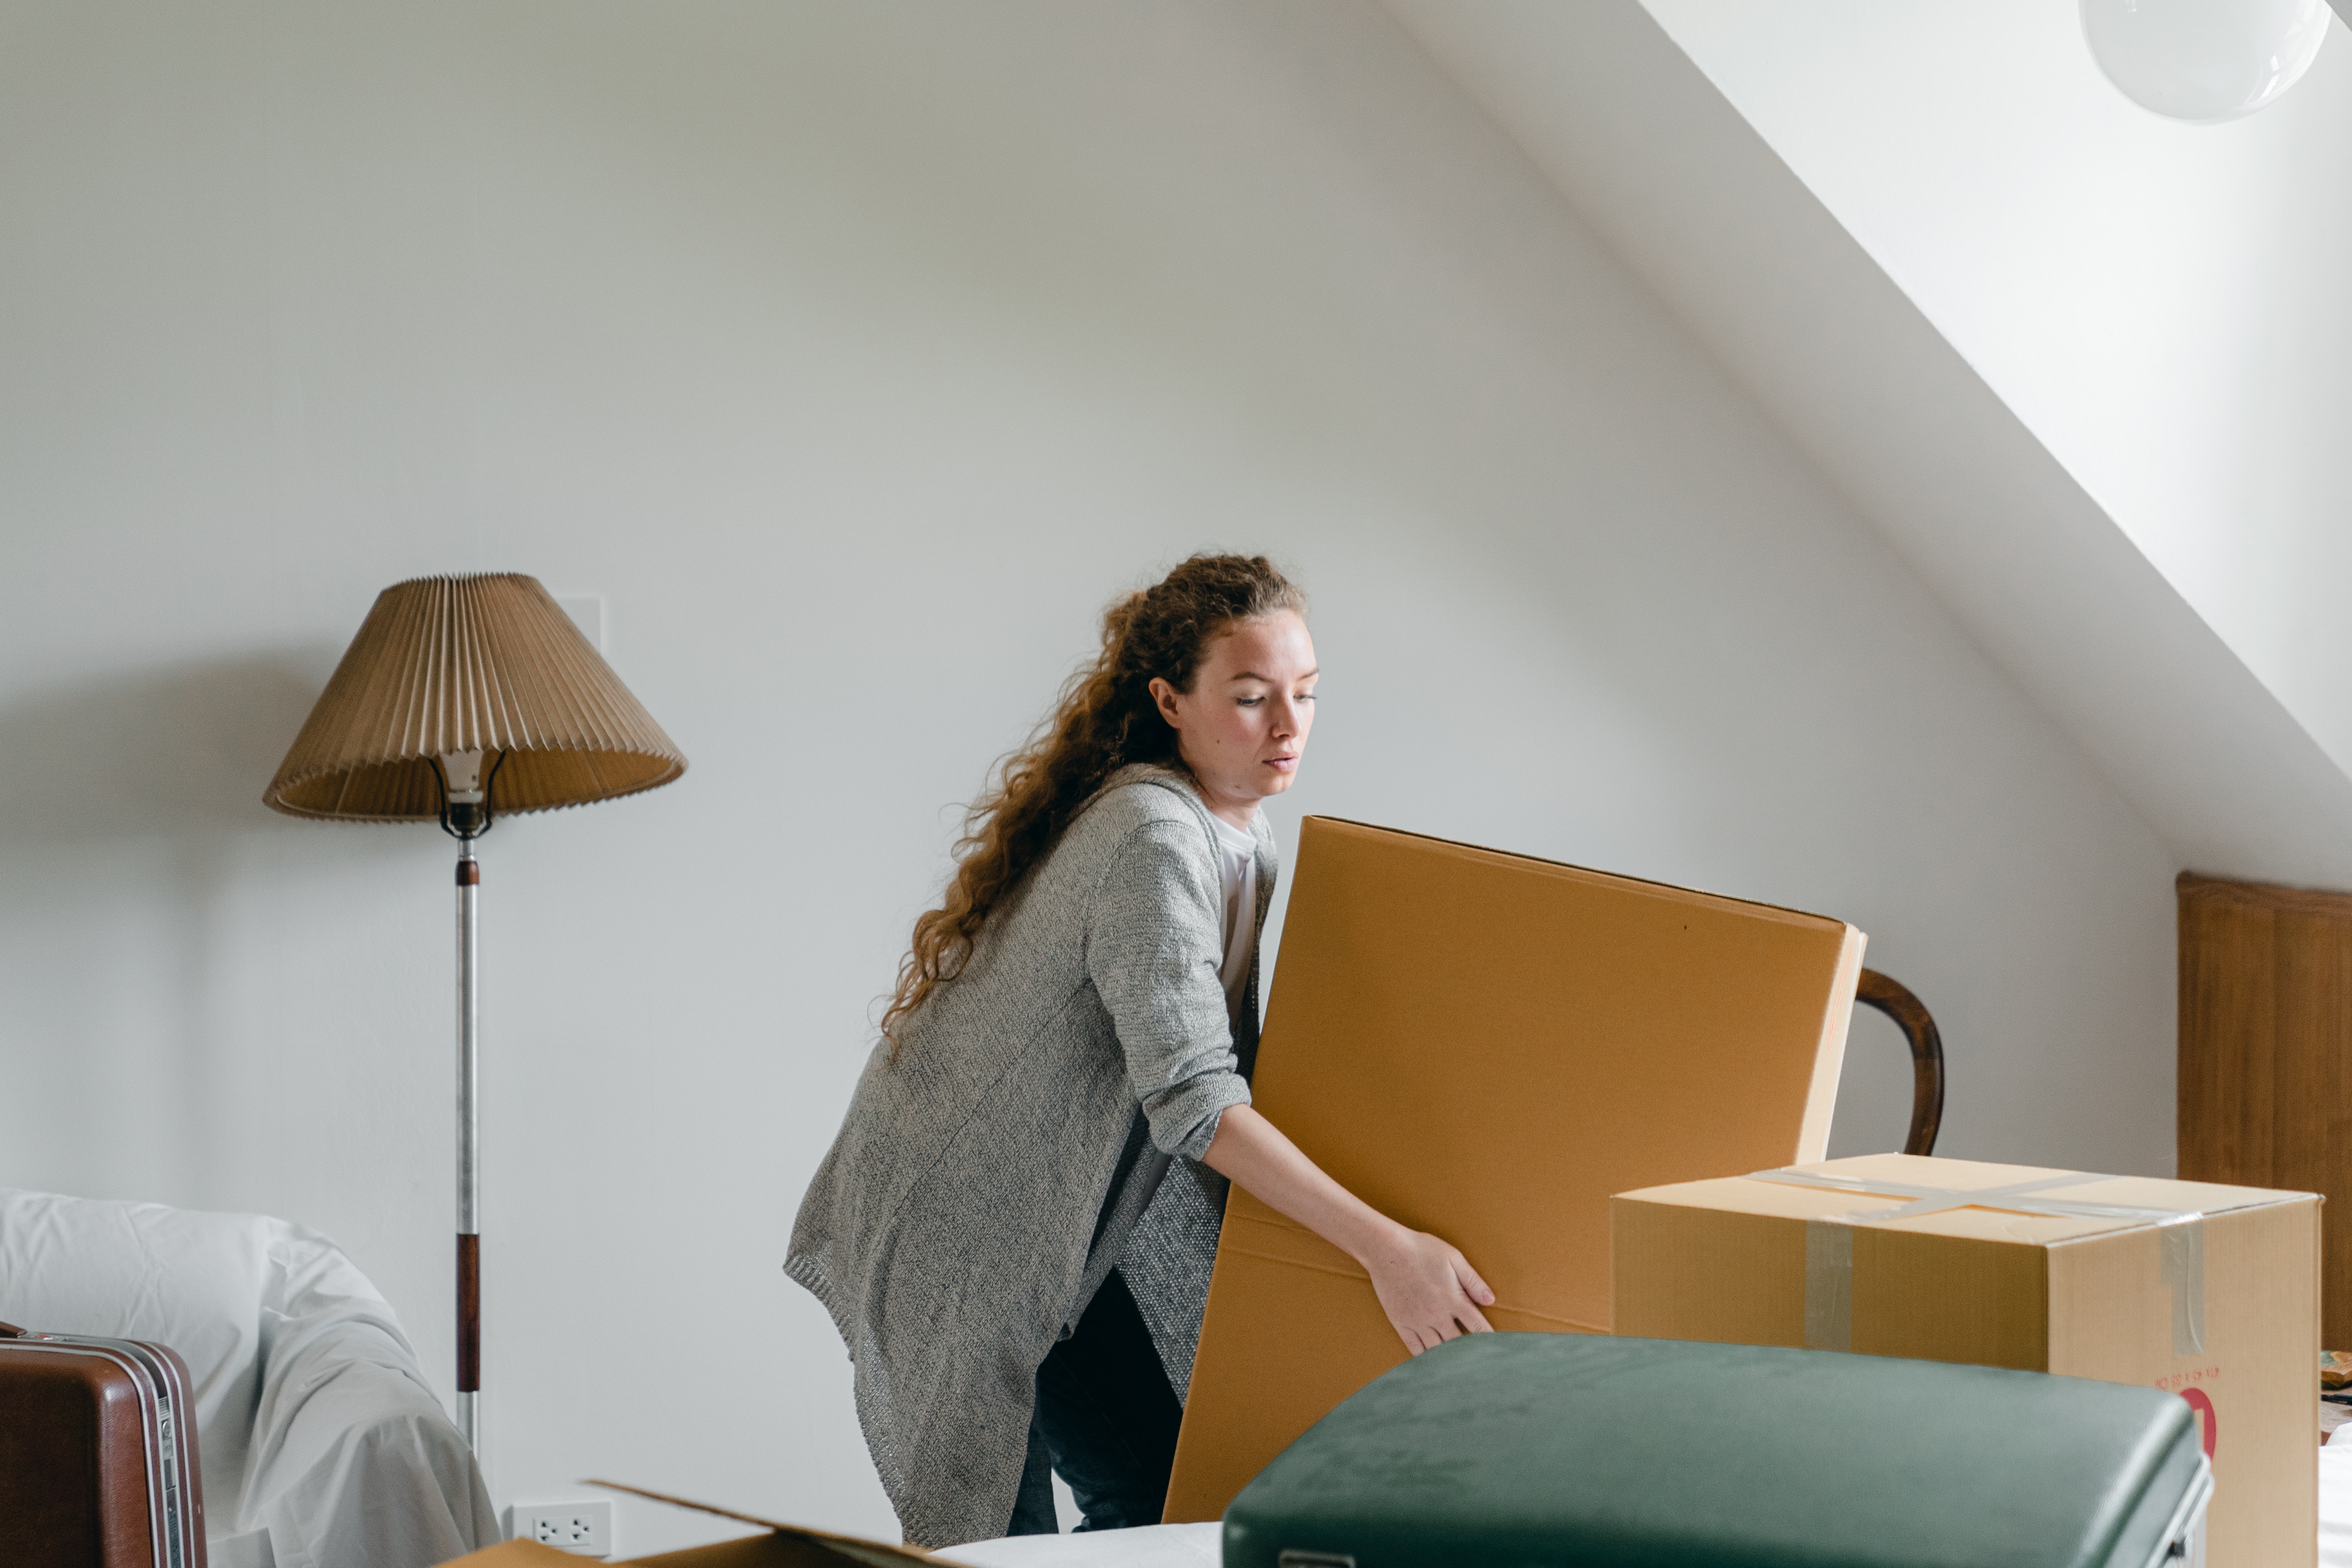 6 Tips to Safely Move Your Heavy Furniture